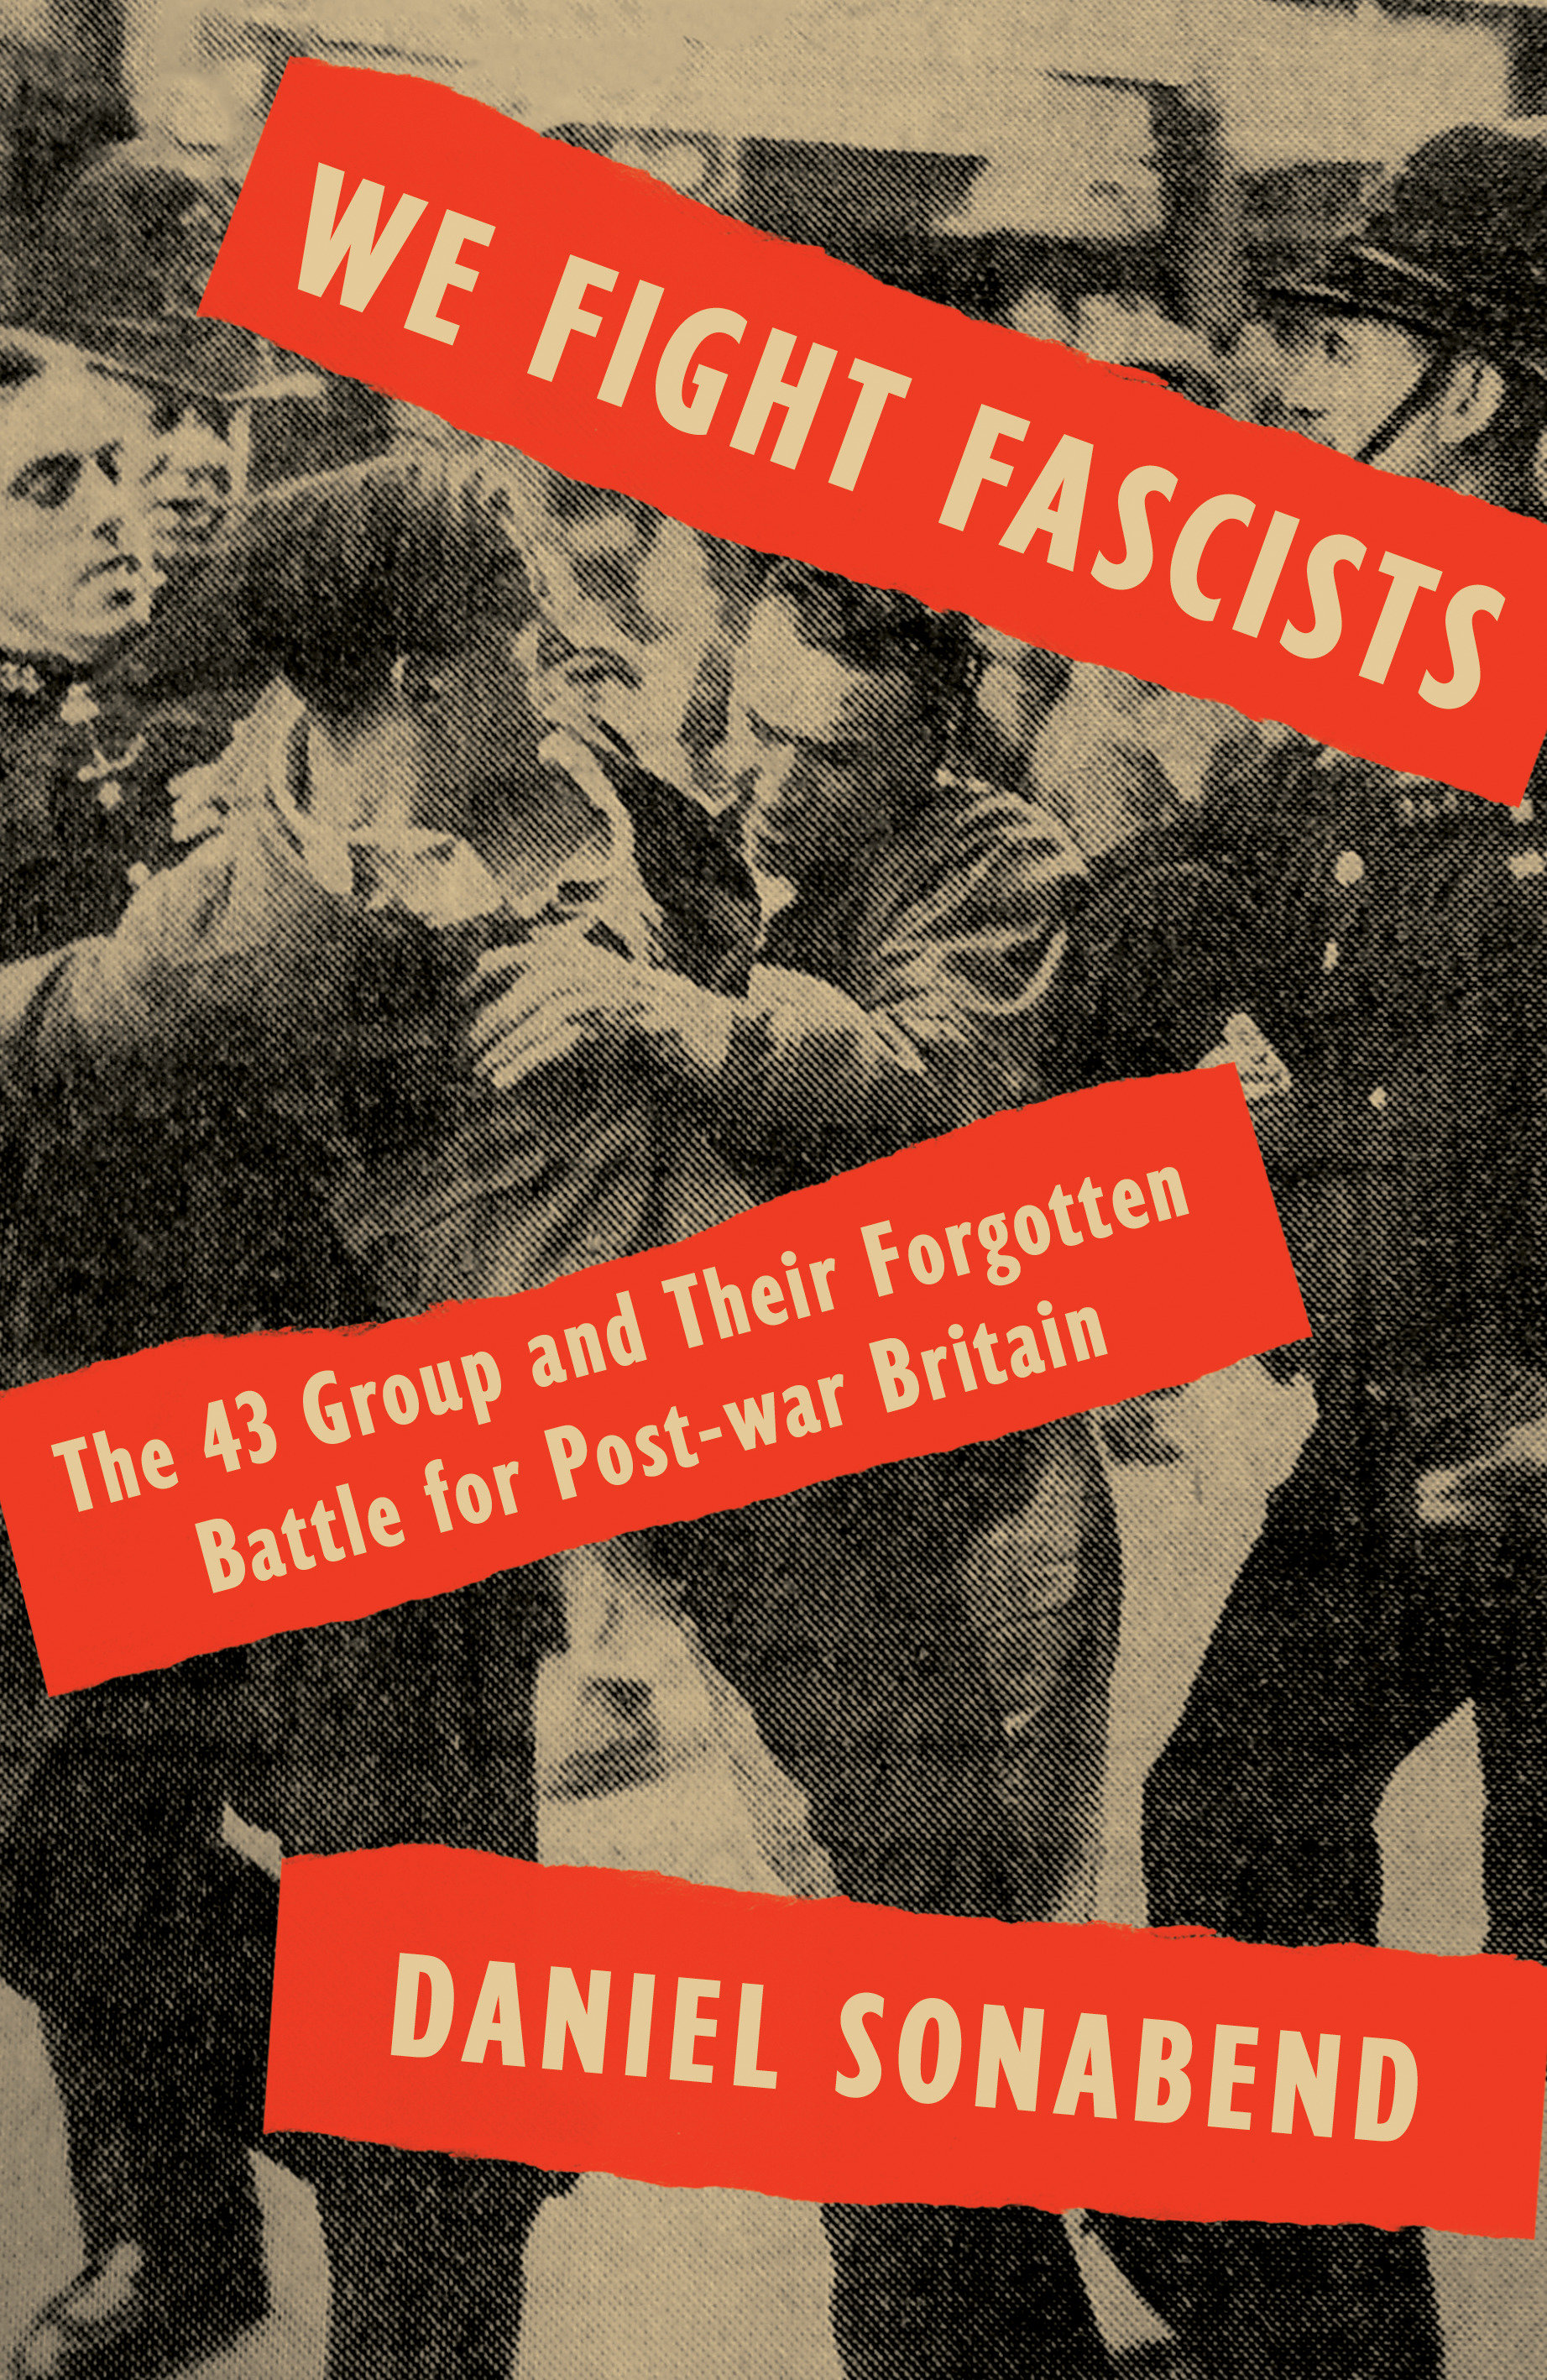 We Fight Fascists (Hardcover Book)